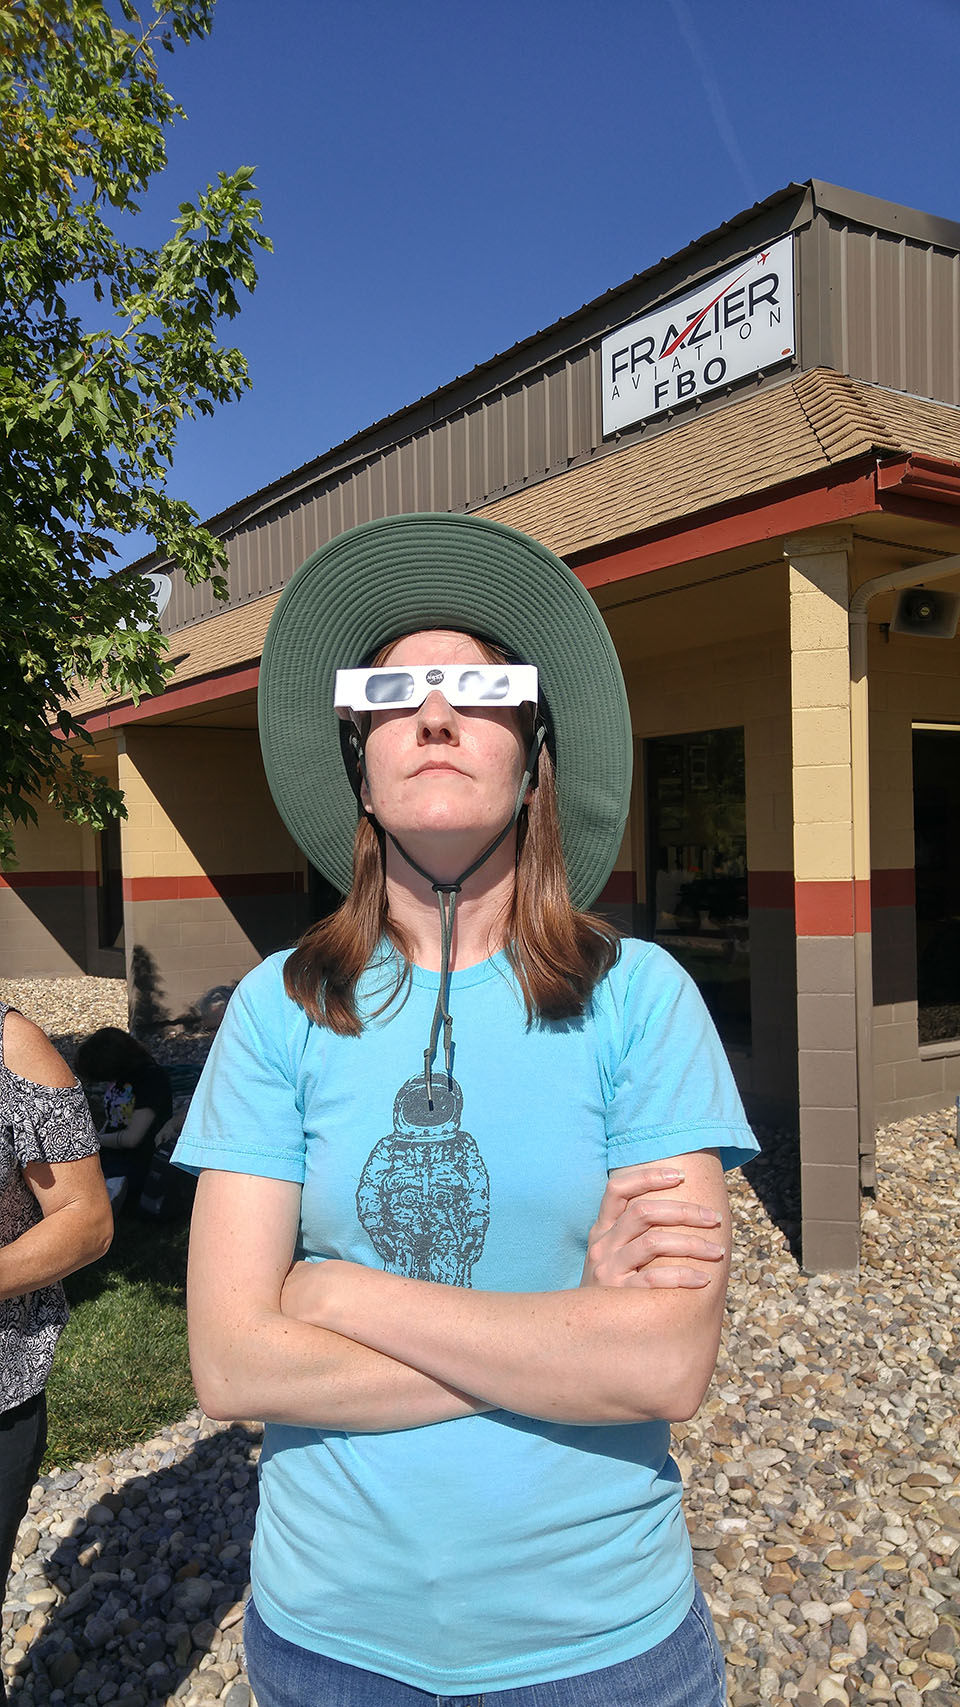 My wife safely watching the eclipse with her eclipse glasses.